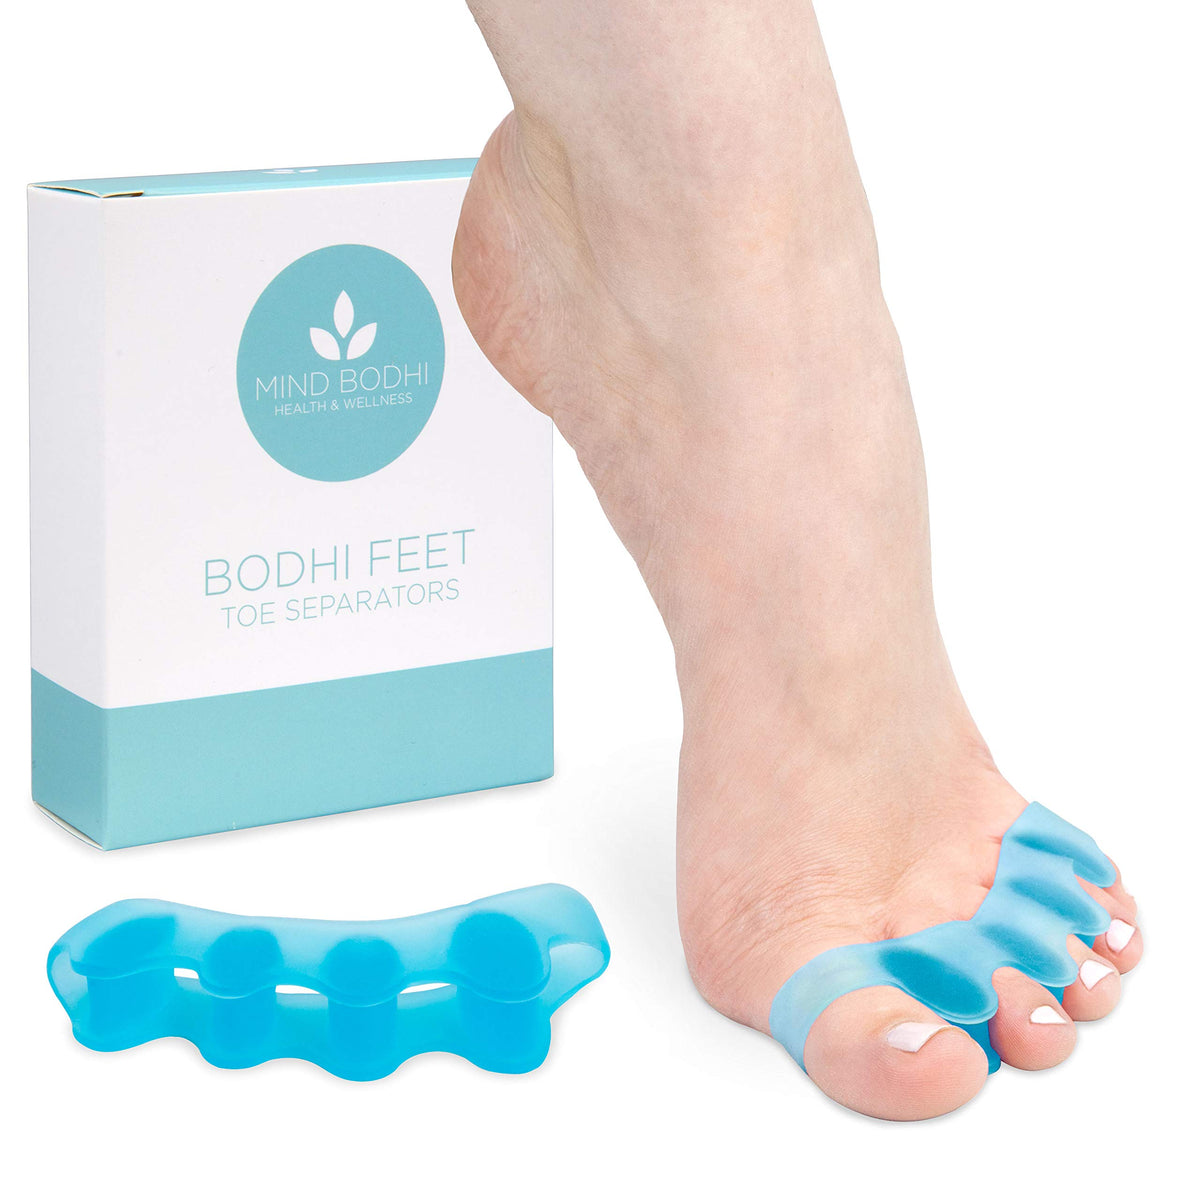 Mind Bodhi Toe Separators to Correct Bunions and Restore Toes to Their Original Shape, For Women Men Toe Spacers Toe Straightener Toe Stretcher Big Toe Correctors Toe Separator, Blue